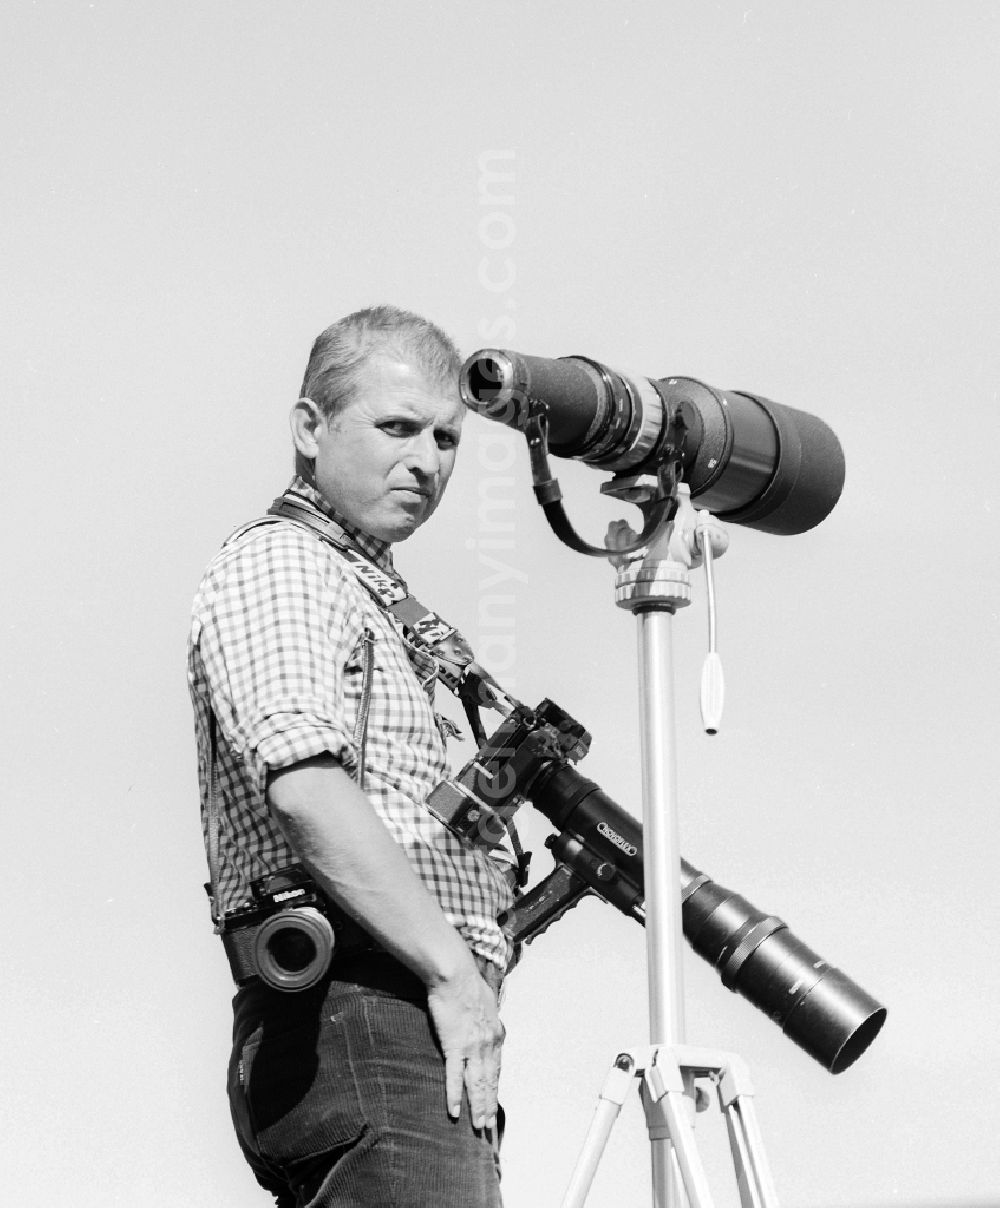 Peenemünde: The chief photojournalist at that time of „ Neues Deutschland “ Gerhard Murza in Peenemuende in the federal state Mecklenburg-West Pomerania in the area of the former GDR, German democratic republic